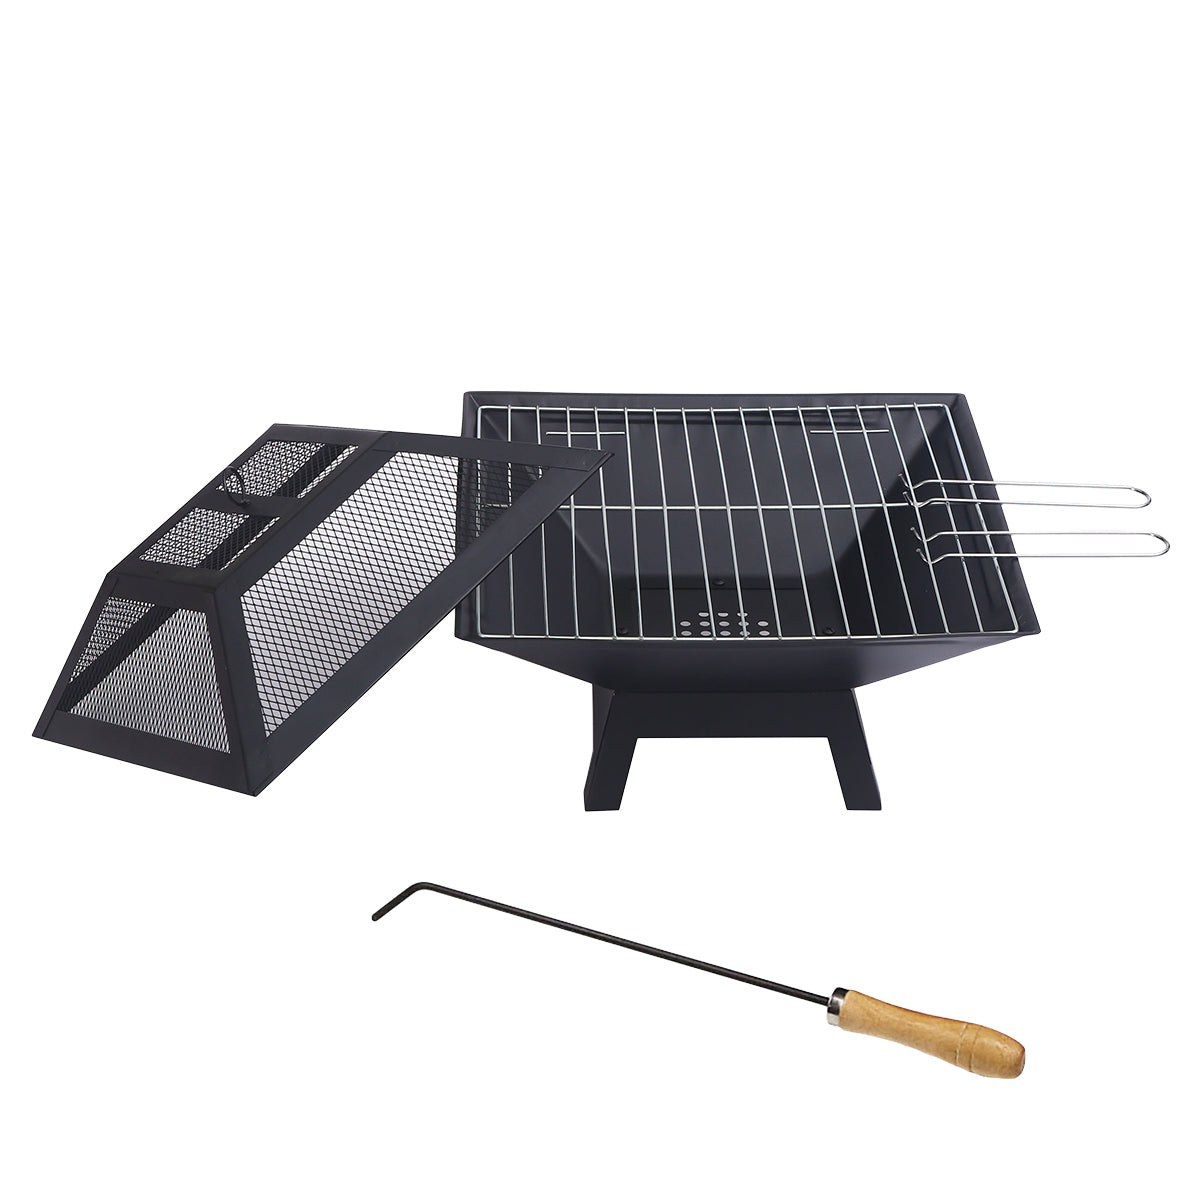 Versatile Portable Fire Pit: Your Essential Companion for Outdoor BBQs, Grilling, Cooking, and Camping Adventures